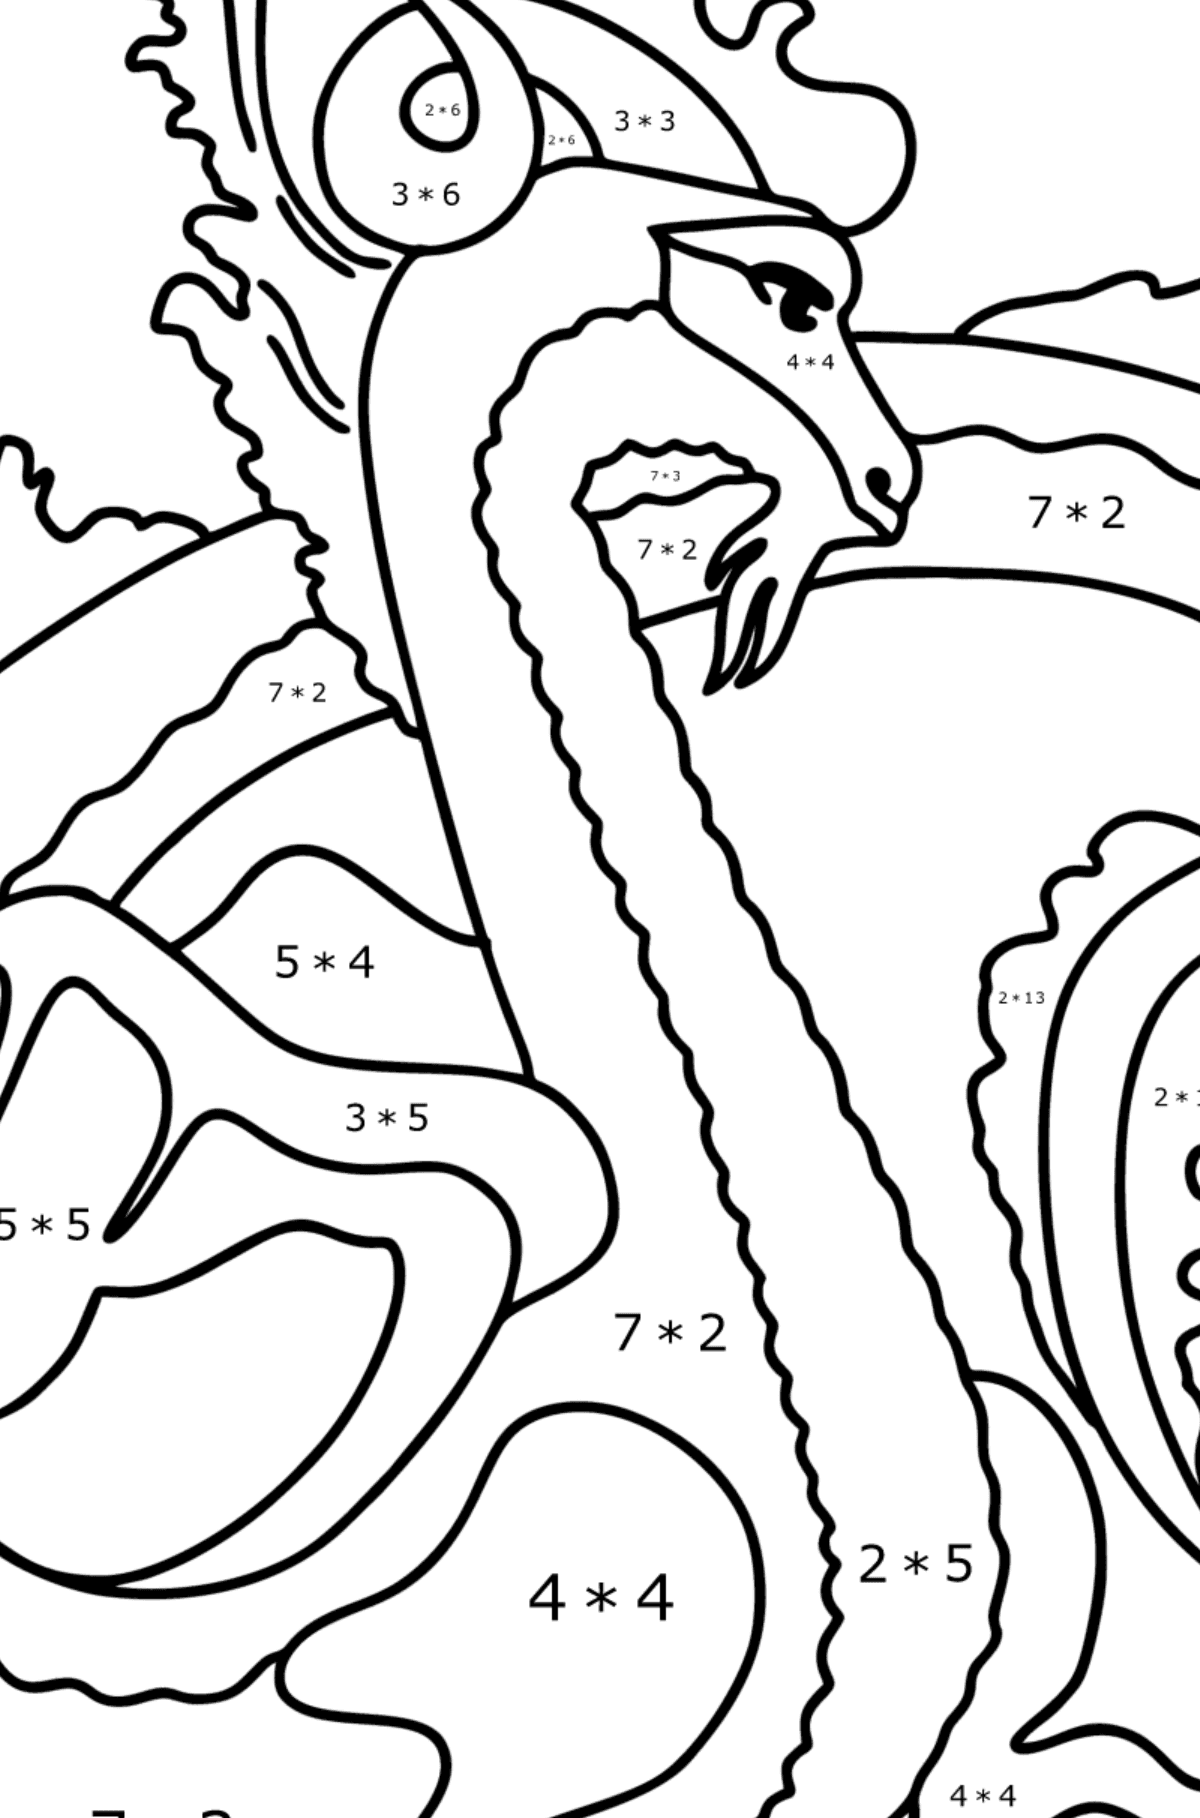 Mythical Dragon coloring page - Math Coloring - Multiplication for Kids